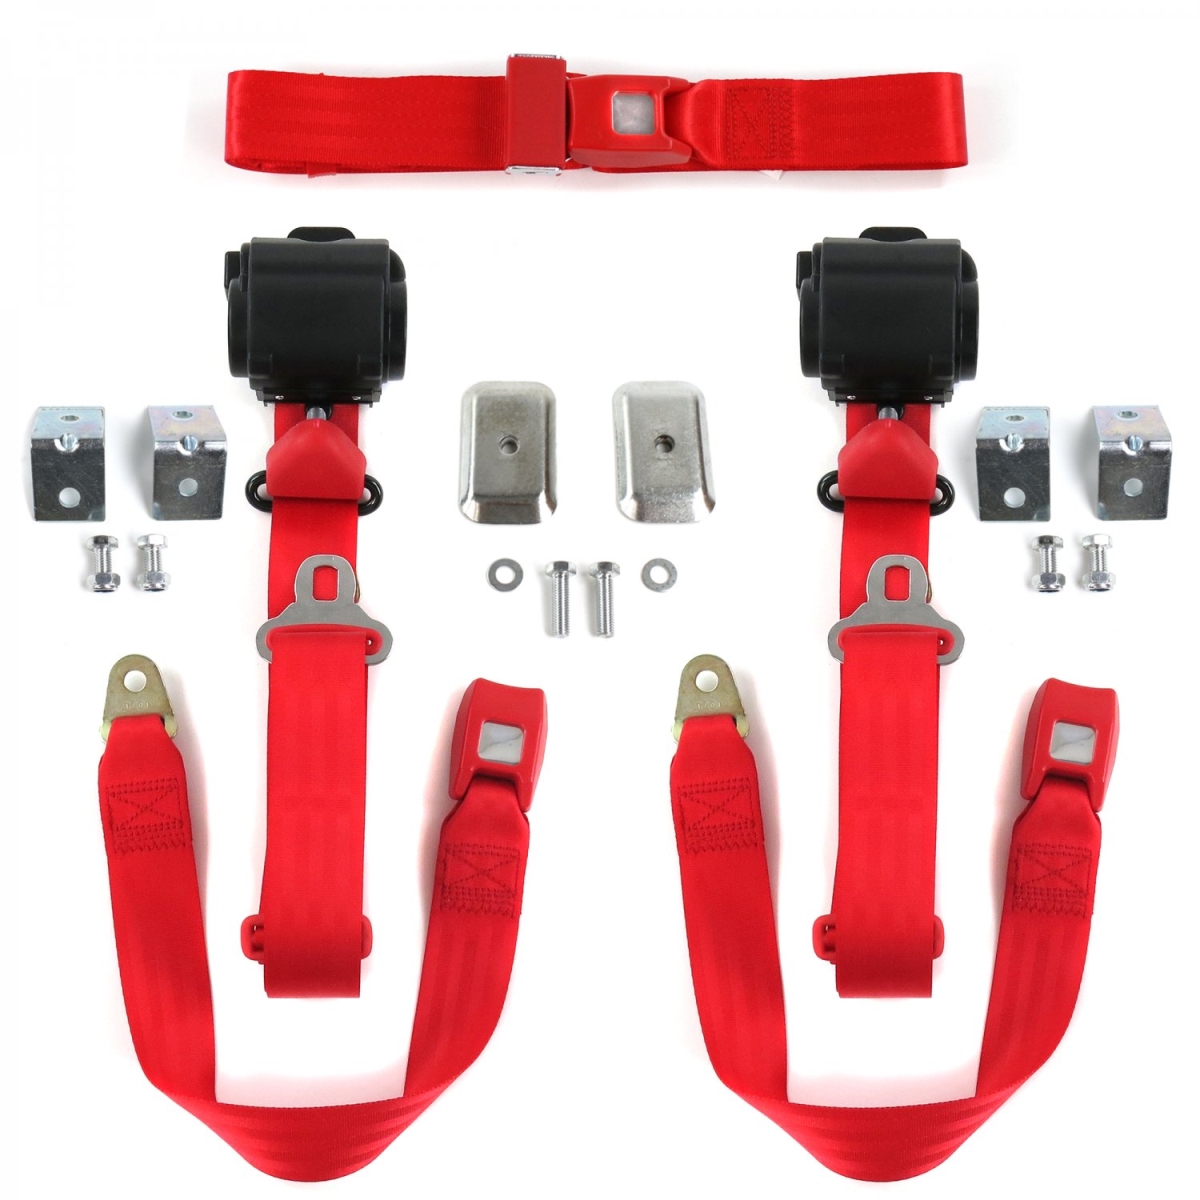 684397 Chevy Impala 1958 Standard 3 Point Red Retractable Bench Seat Belt Kit with Bracketry - 3 Belts -  safeTboy